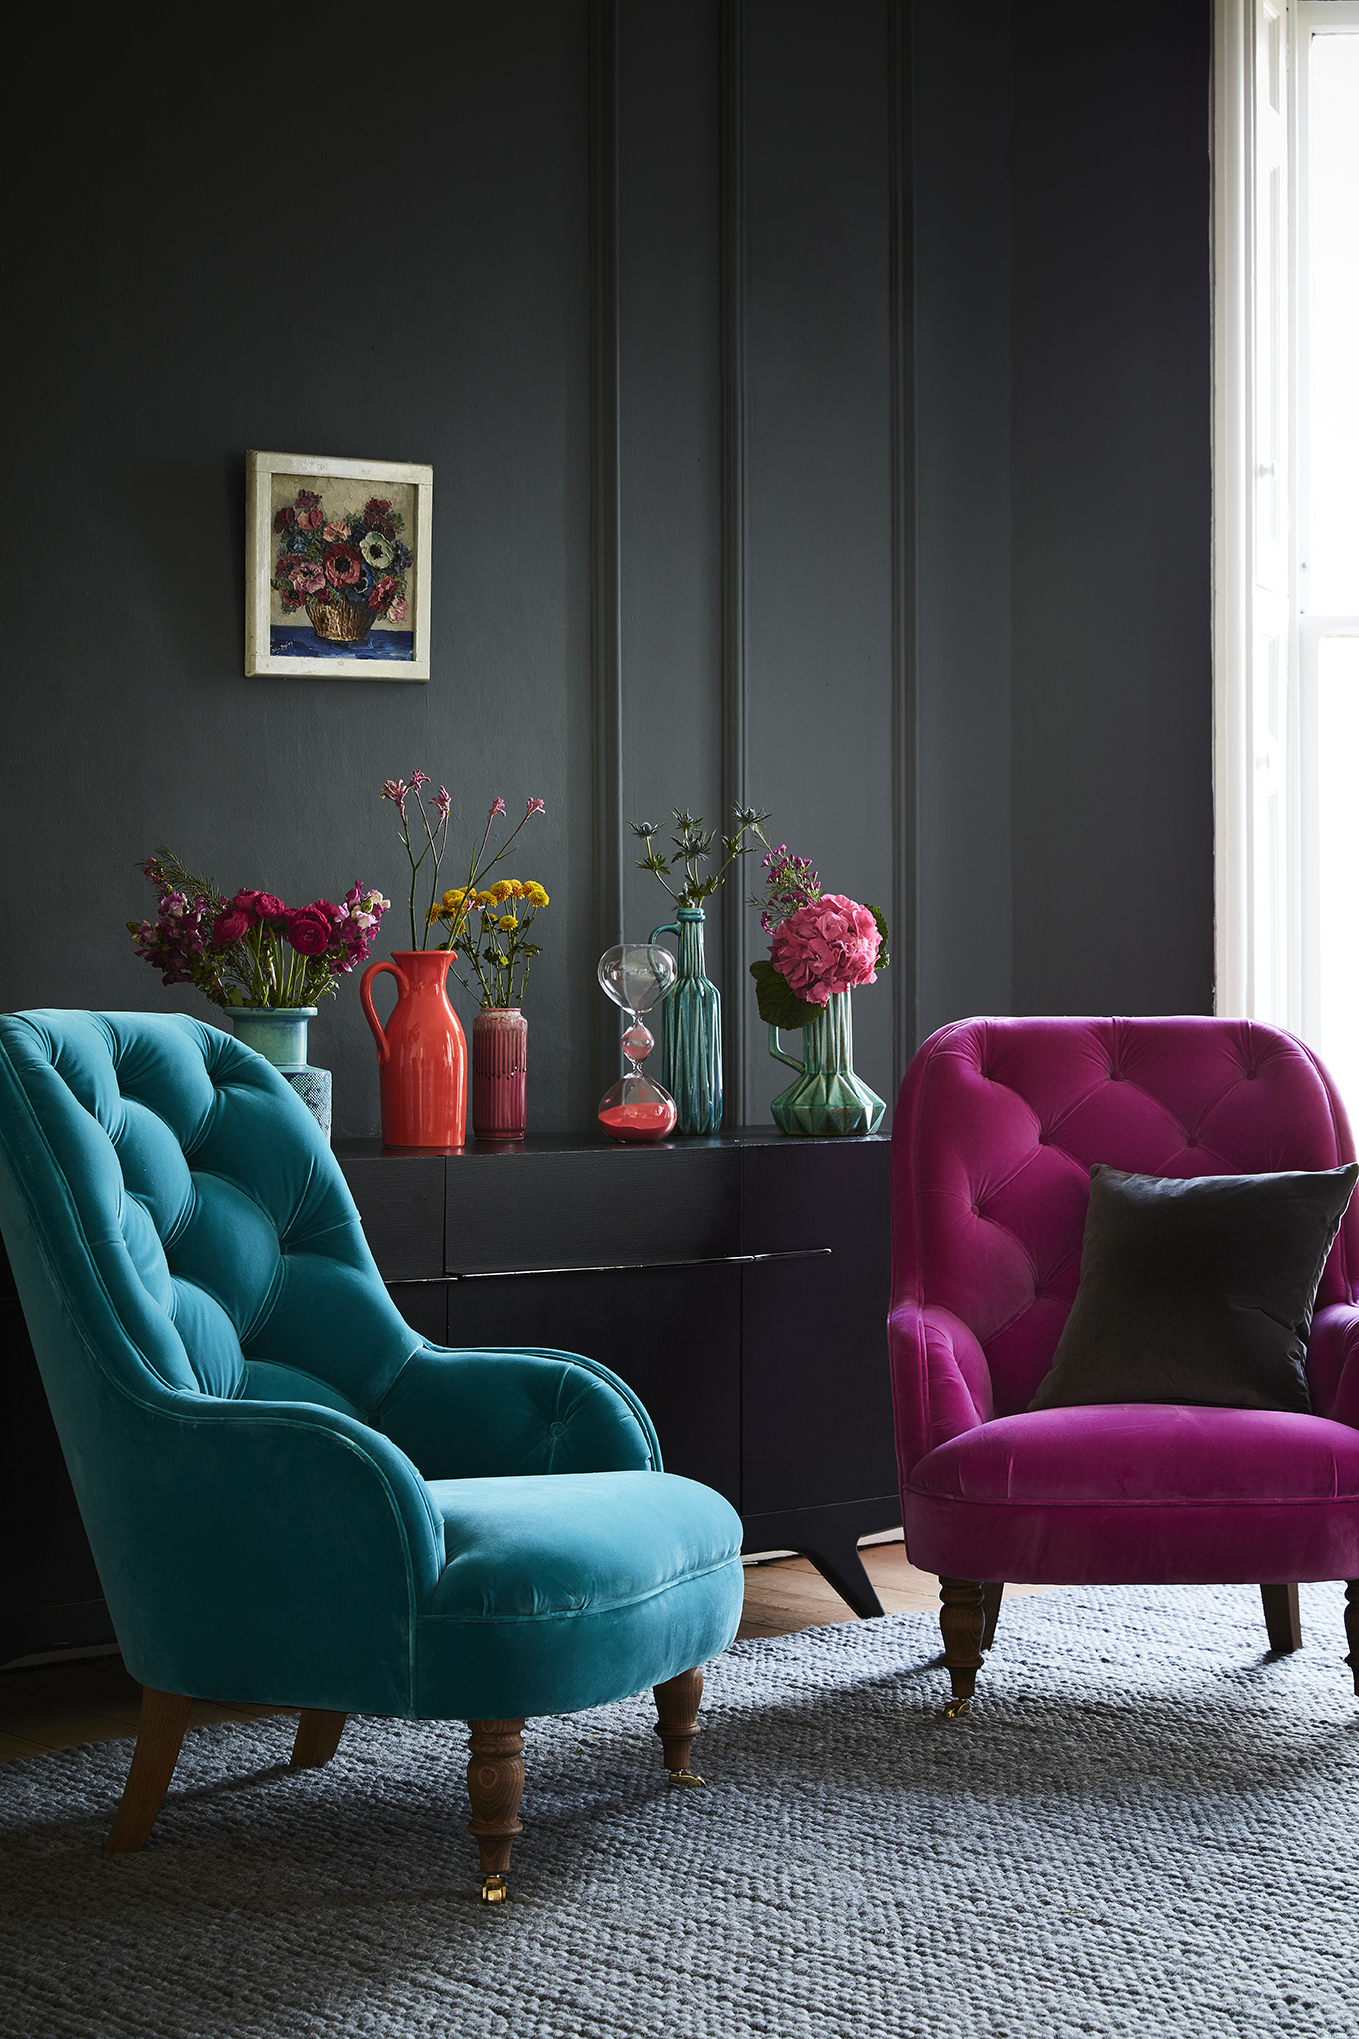 Jewel Tone Interiors That Show You How To Implement This Trend The